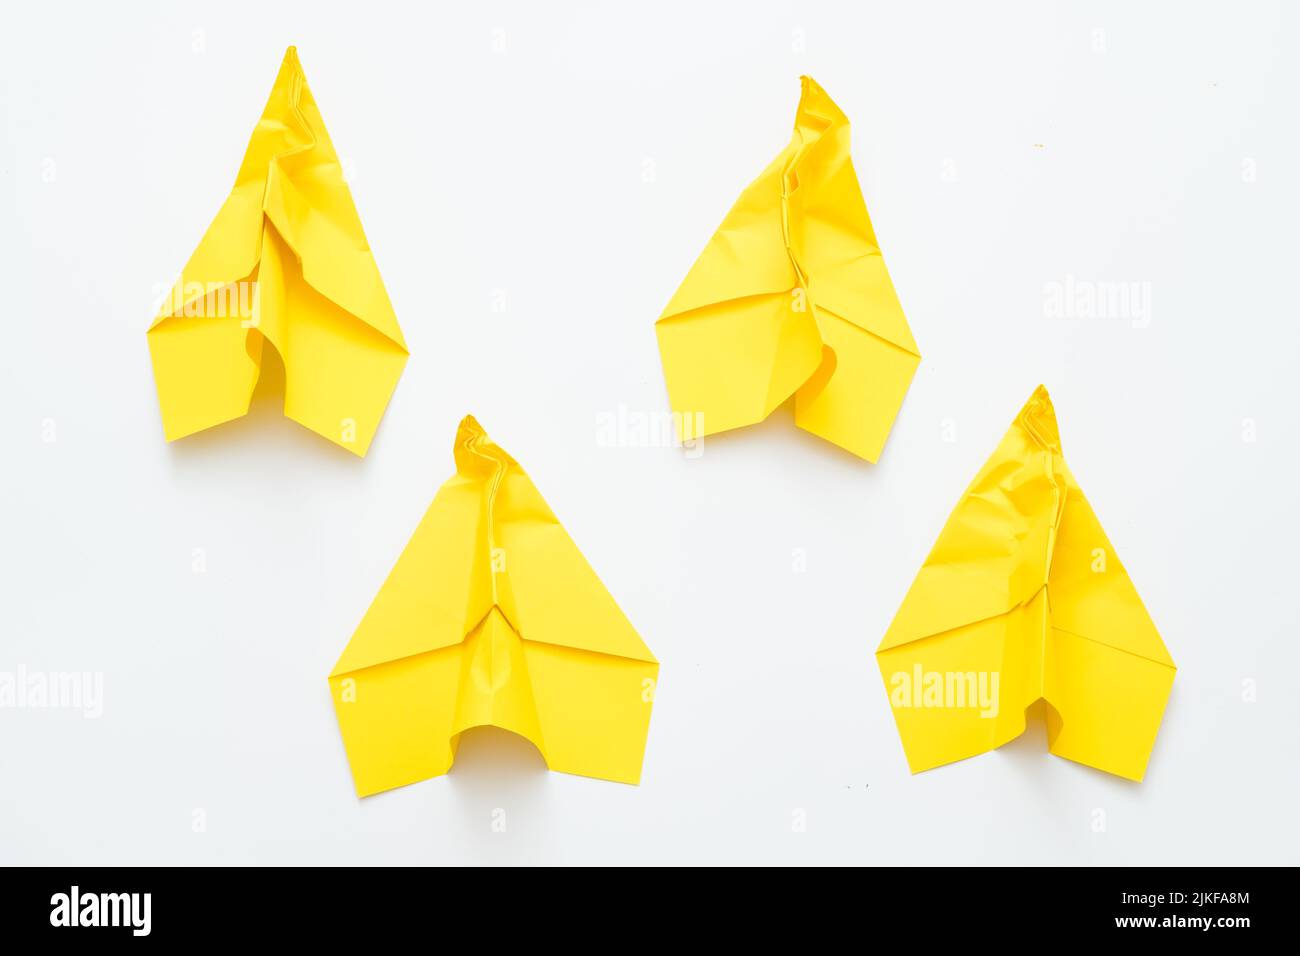 persistence motivation yellow creased paper planes Stock Photo